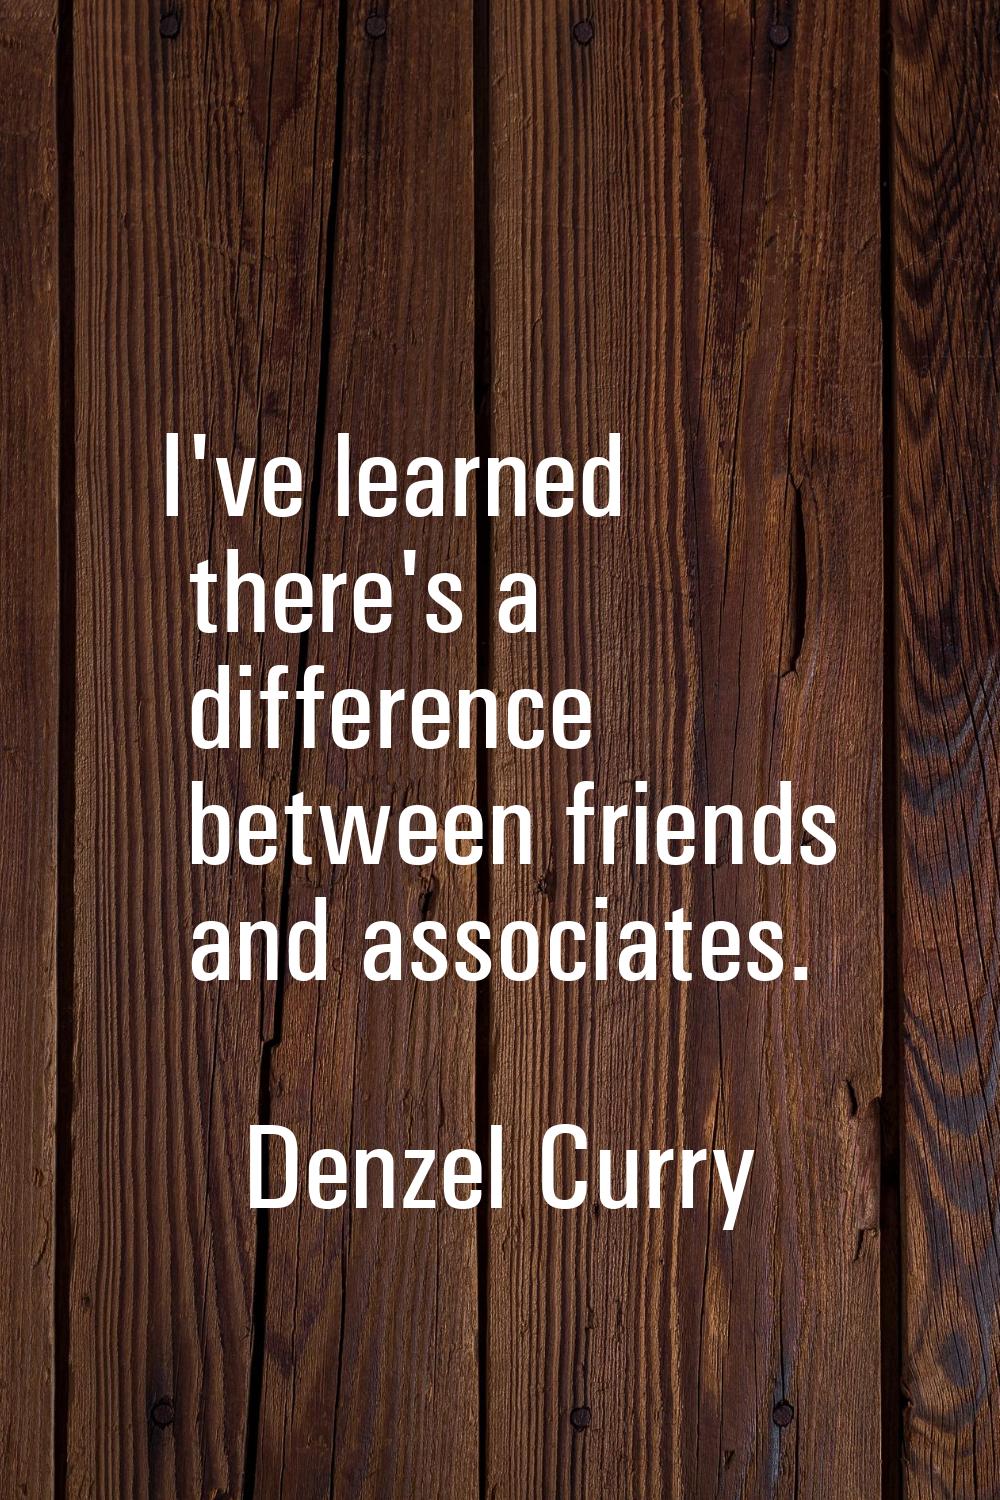 I've learned there's a difference between friends and associates.